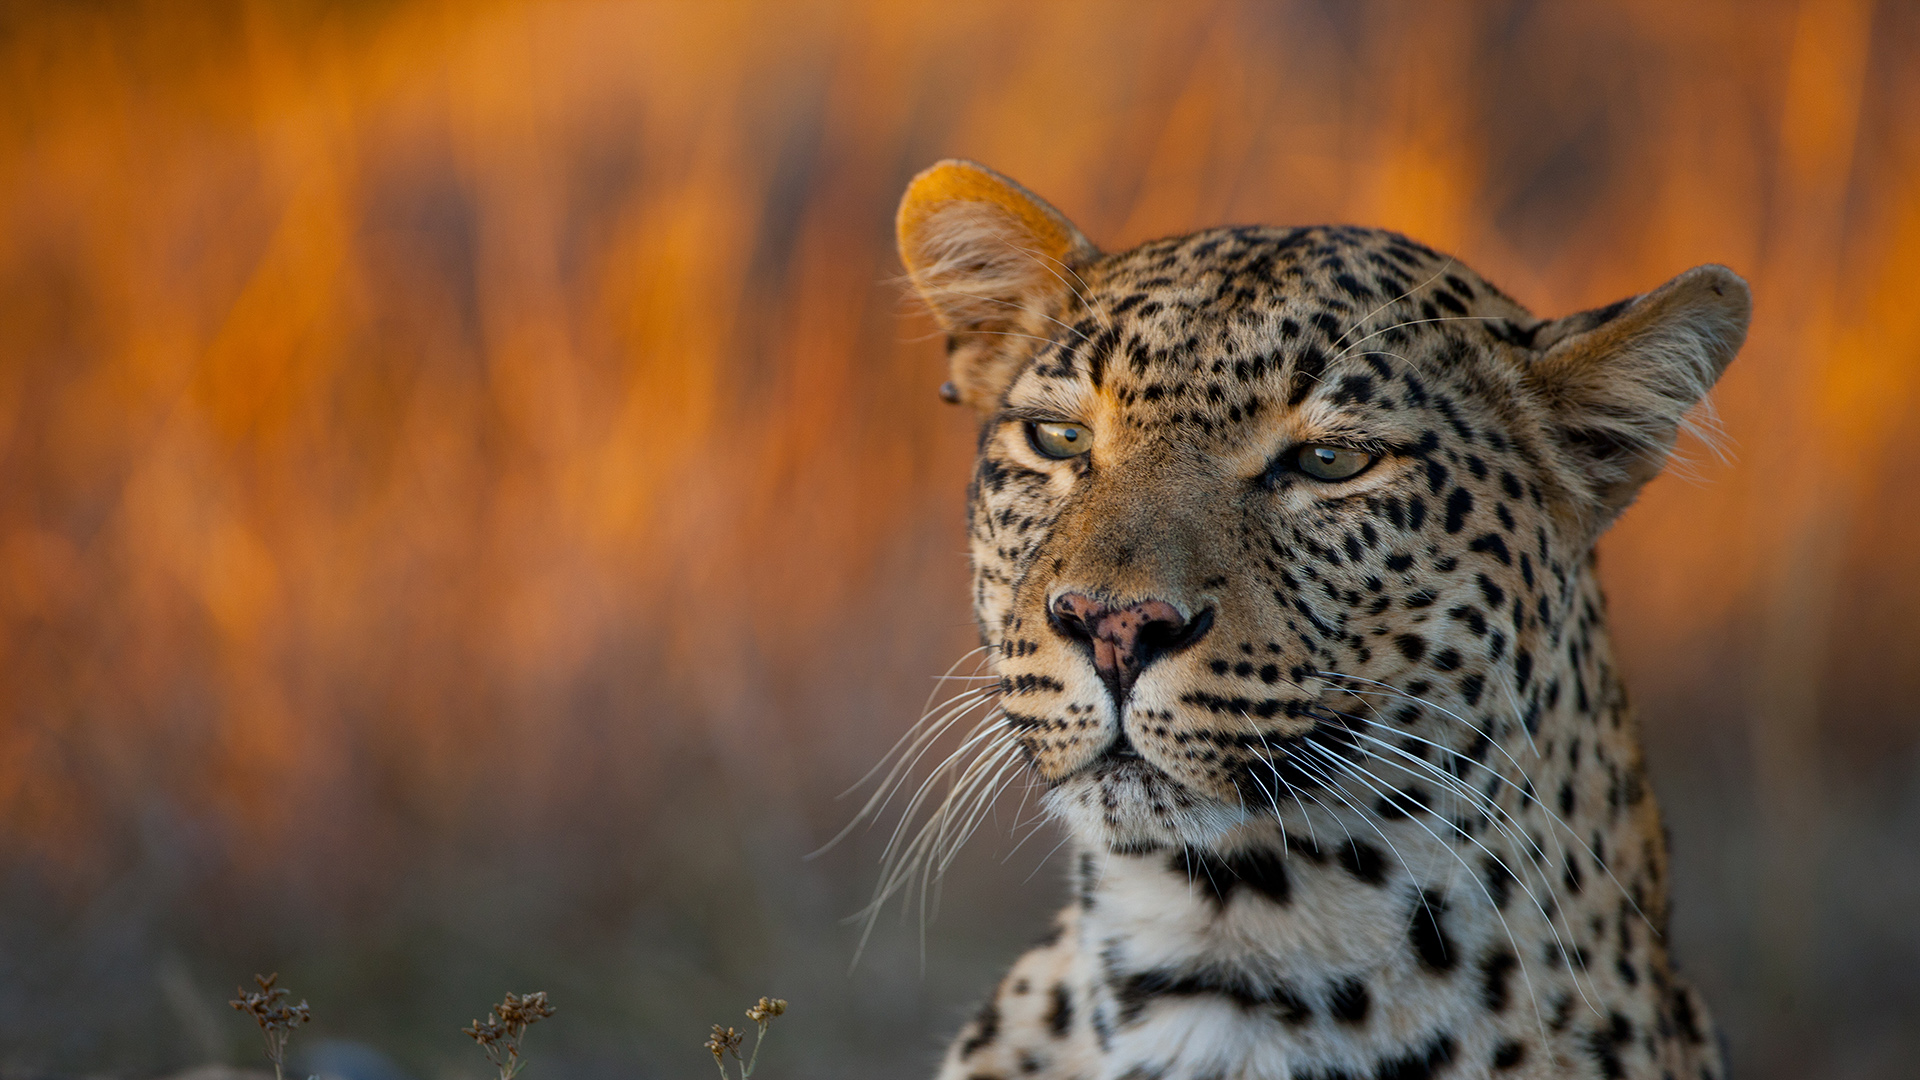 A close-up portrait of a leopard, with orange grasses in the background